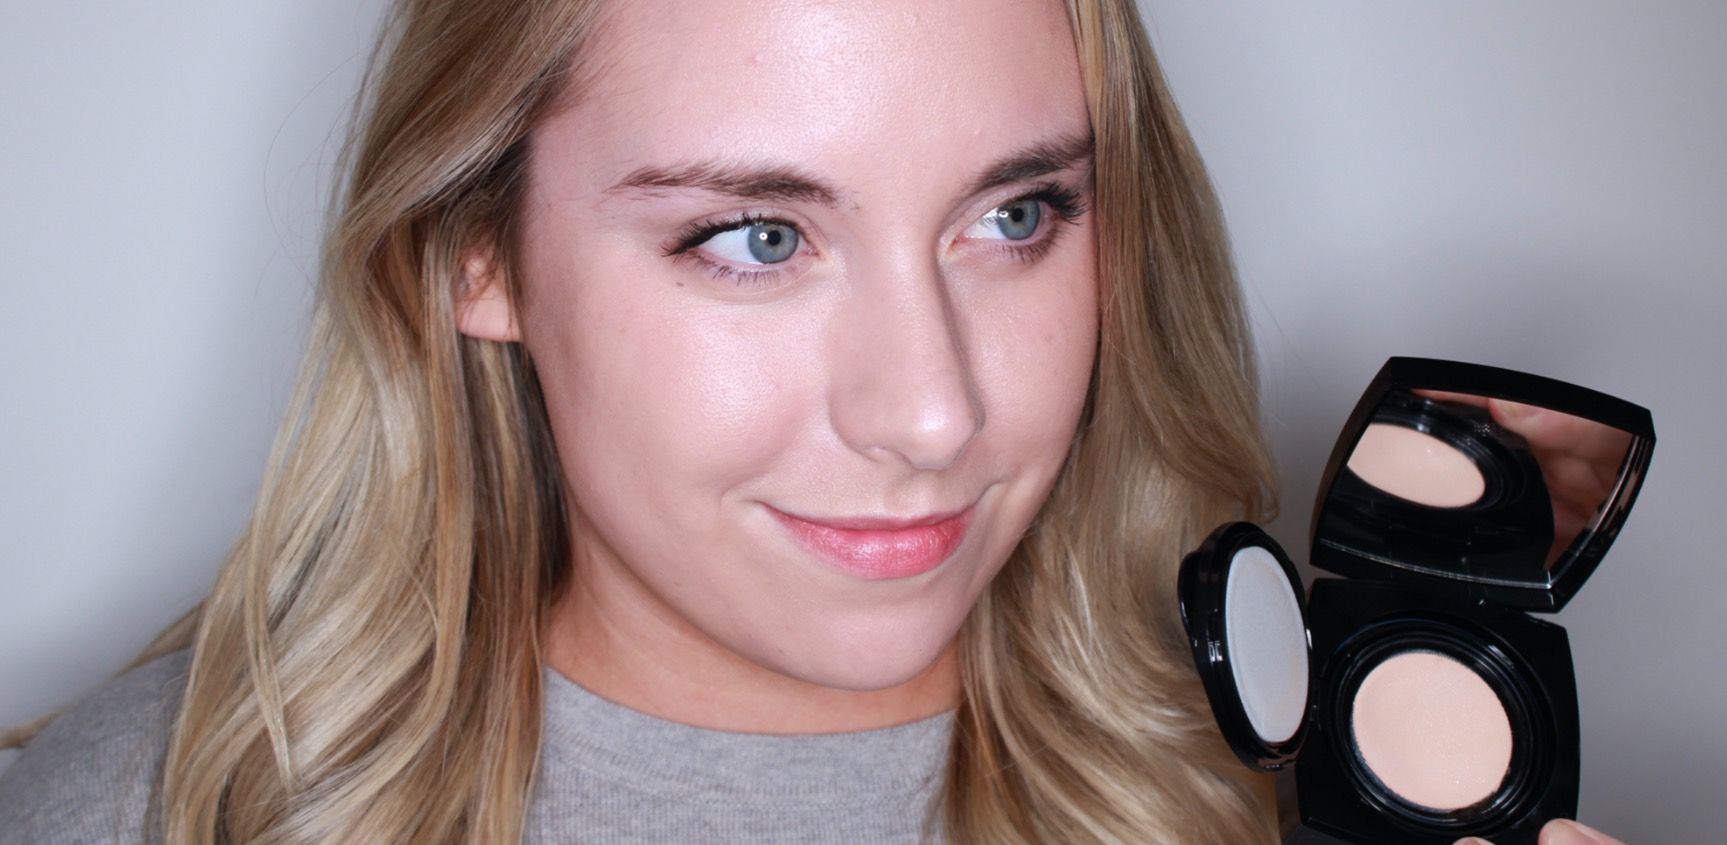 Chanel's new healthy glow gel foundation review